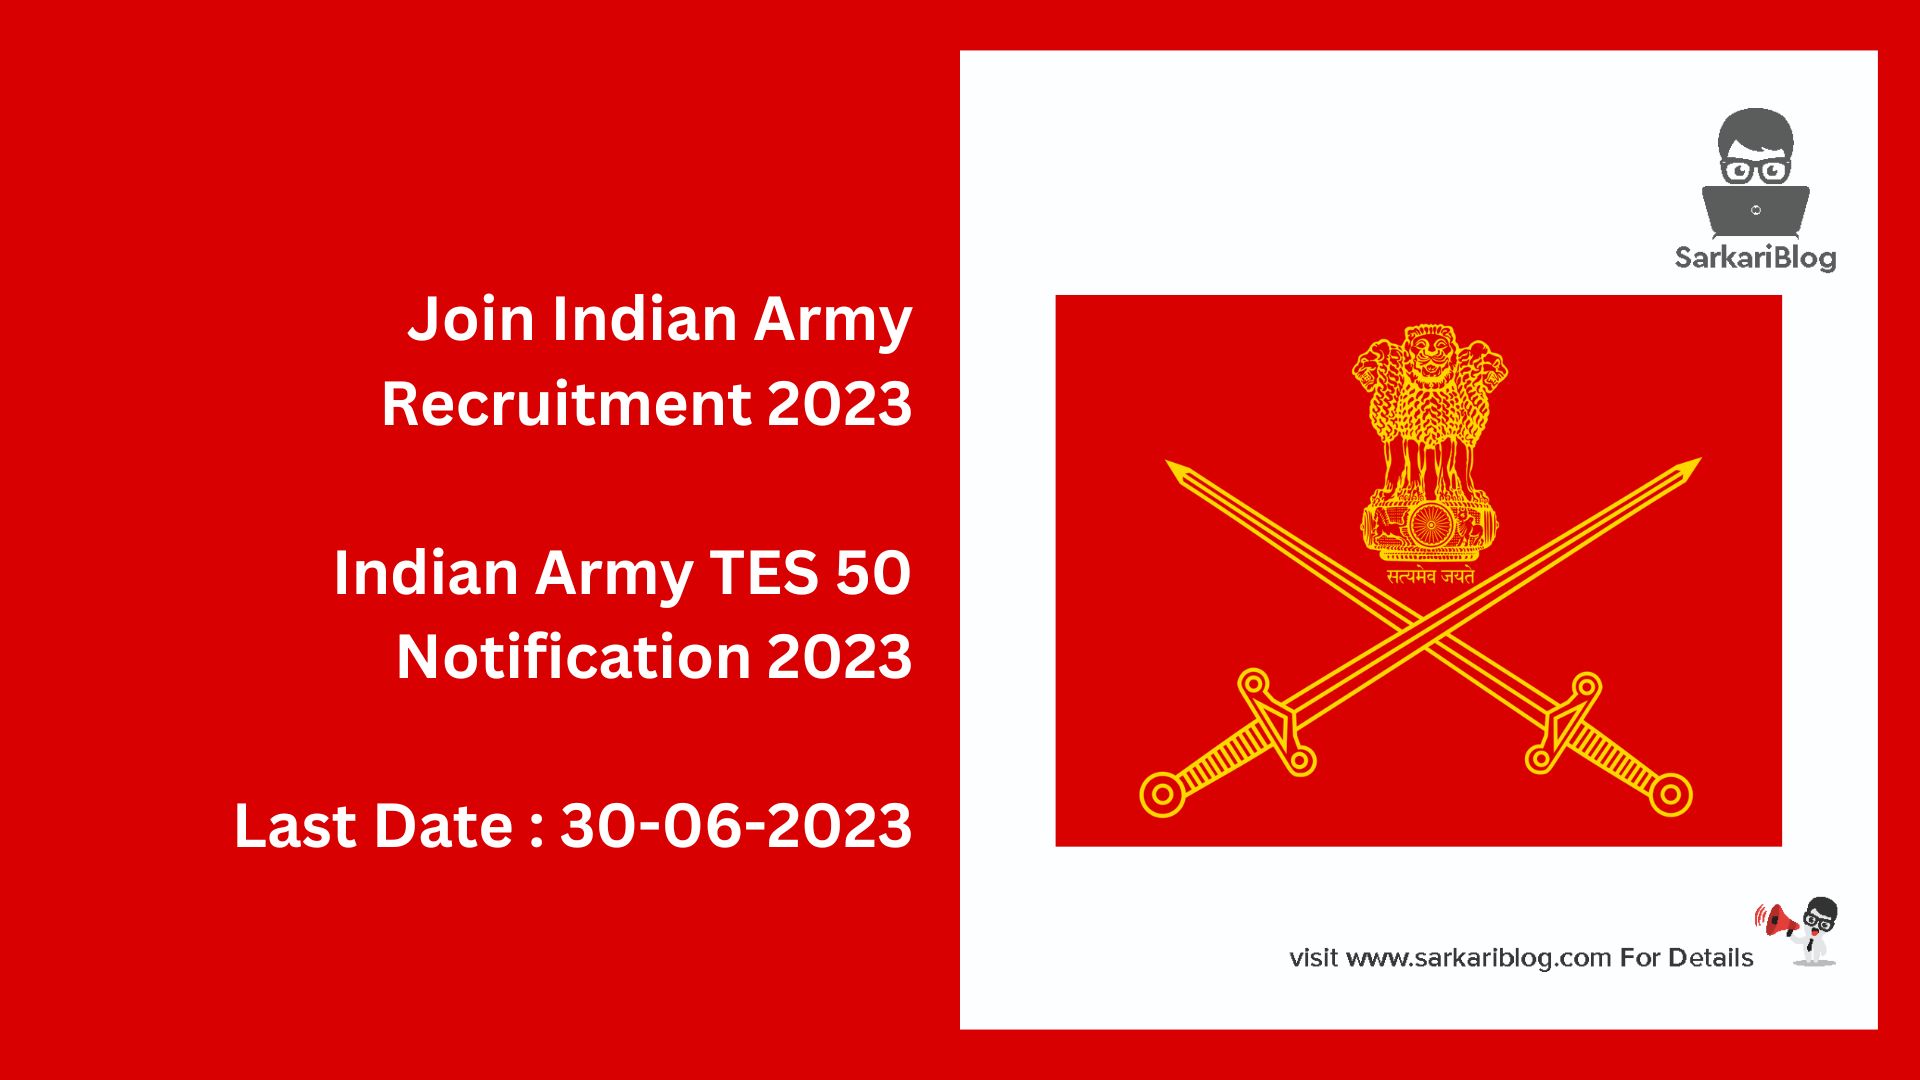 Join Indian Army Recruitment 2023